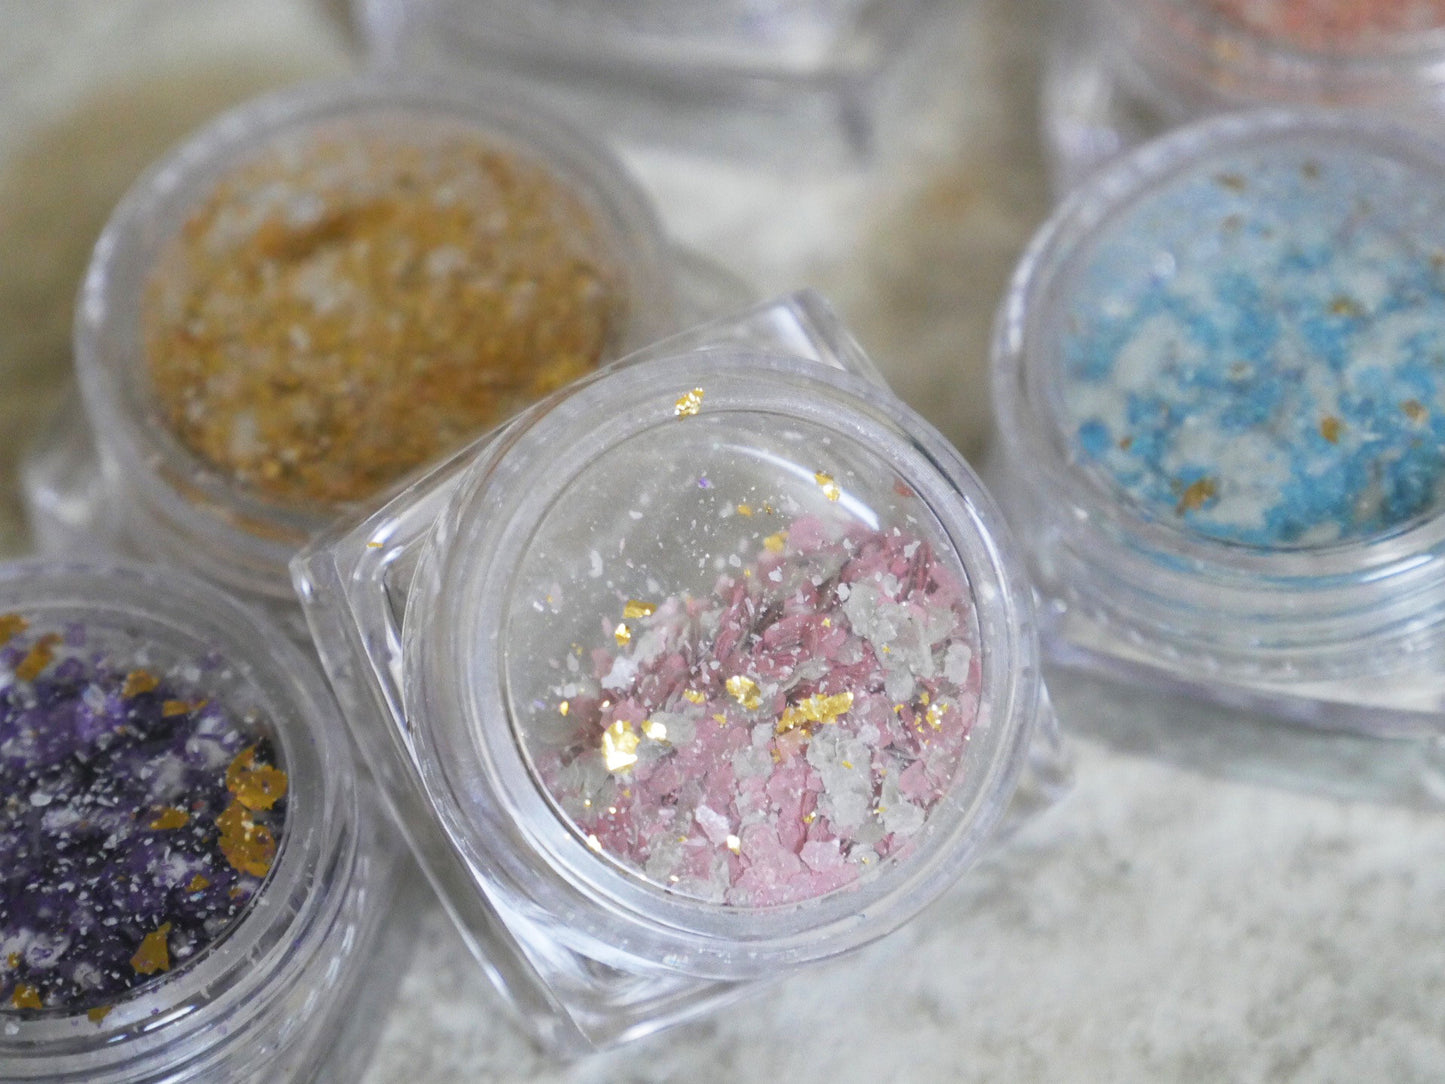 6 cases Pastel Colors Chunky Glitter Flakes/ Irregular Flashy Gold Foils Chips/ Muted Hue Nail design Glitter supply/ Mixed Crafts glitters